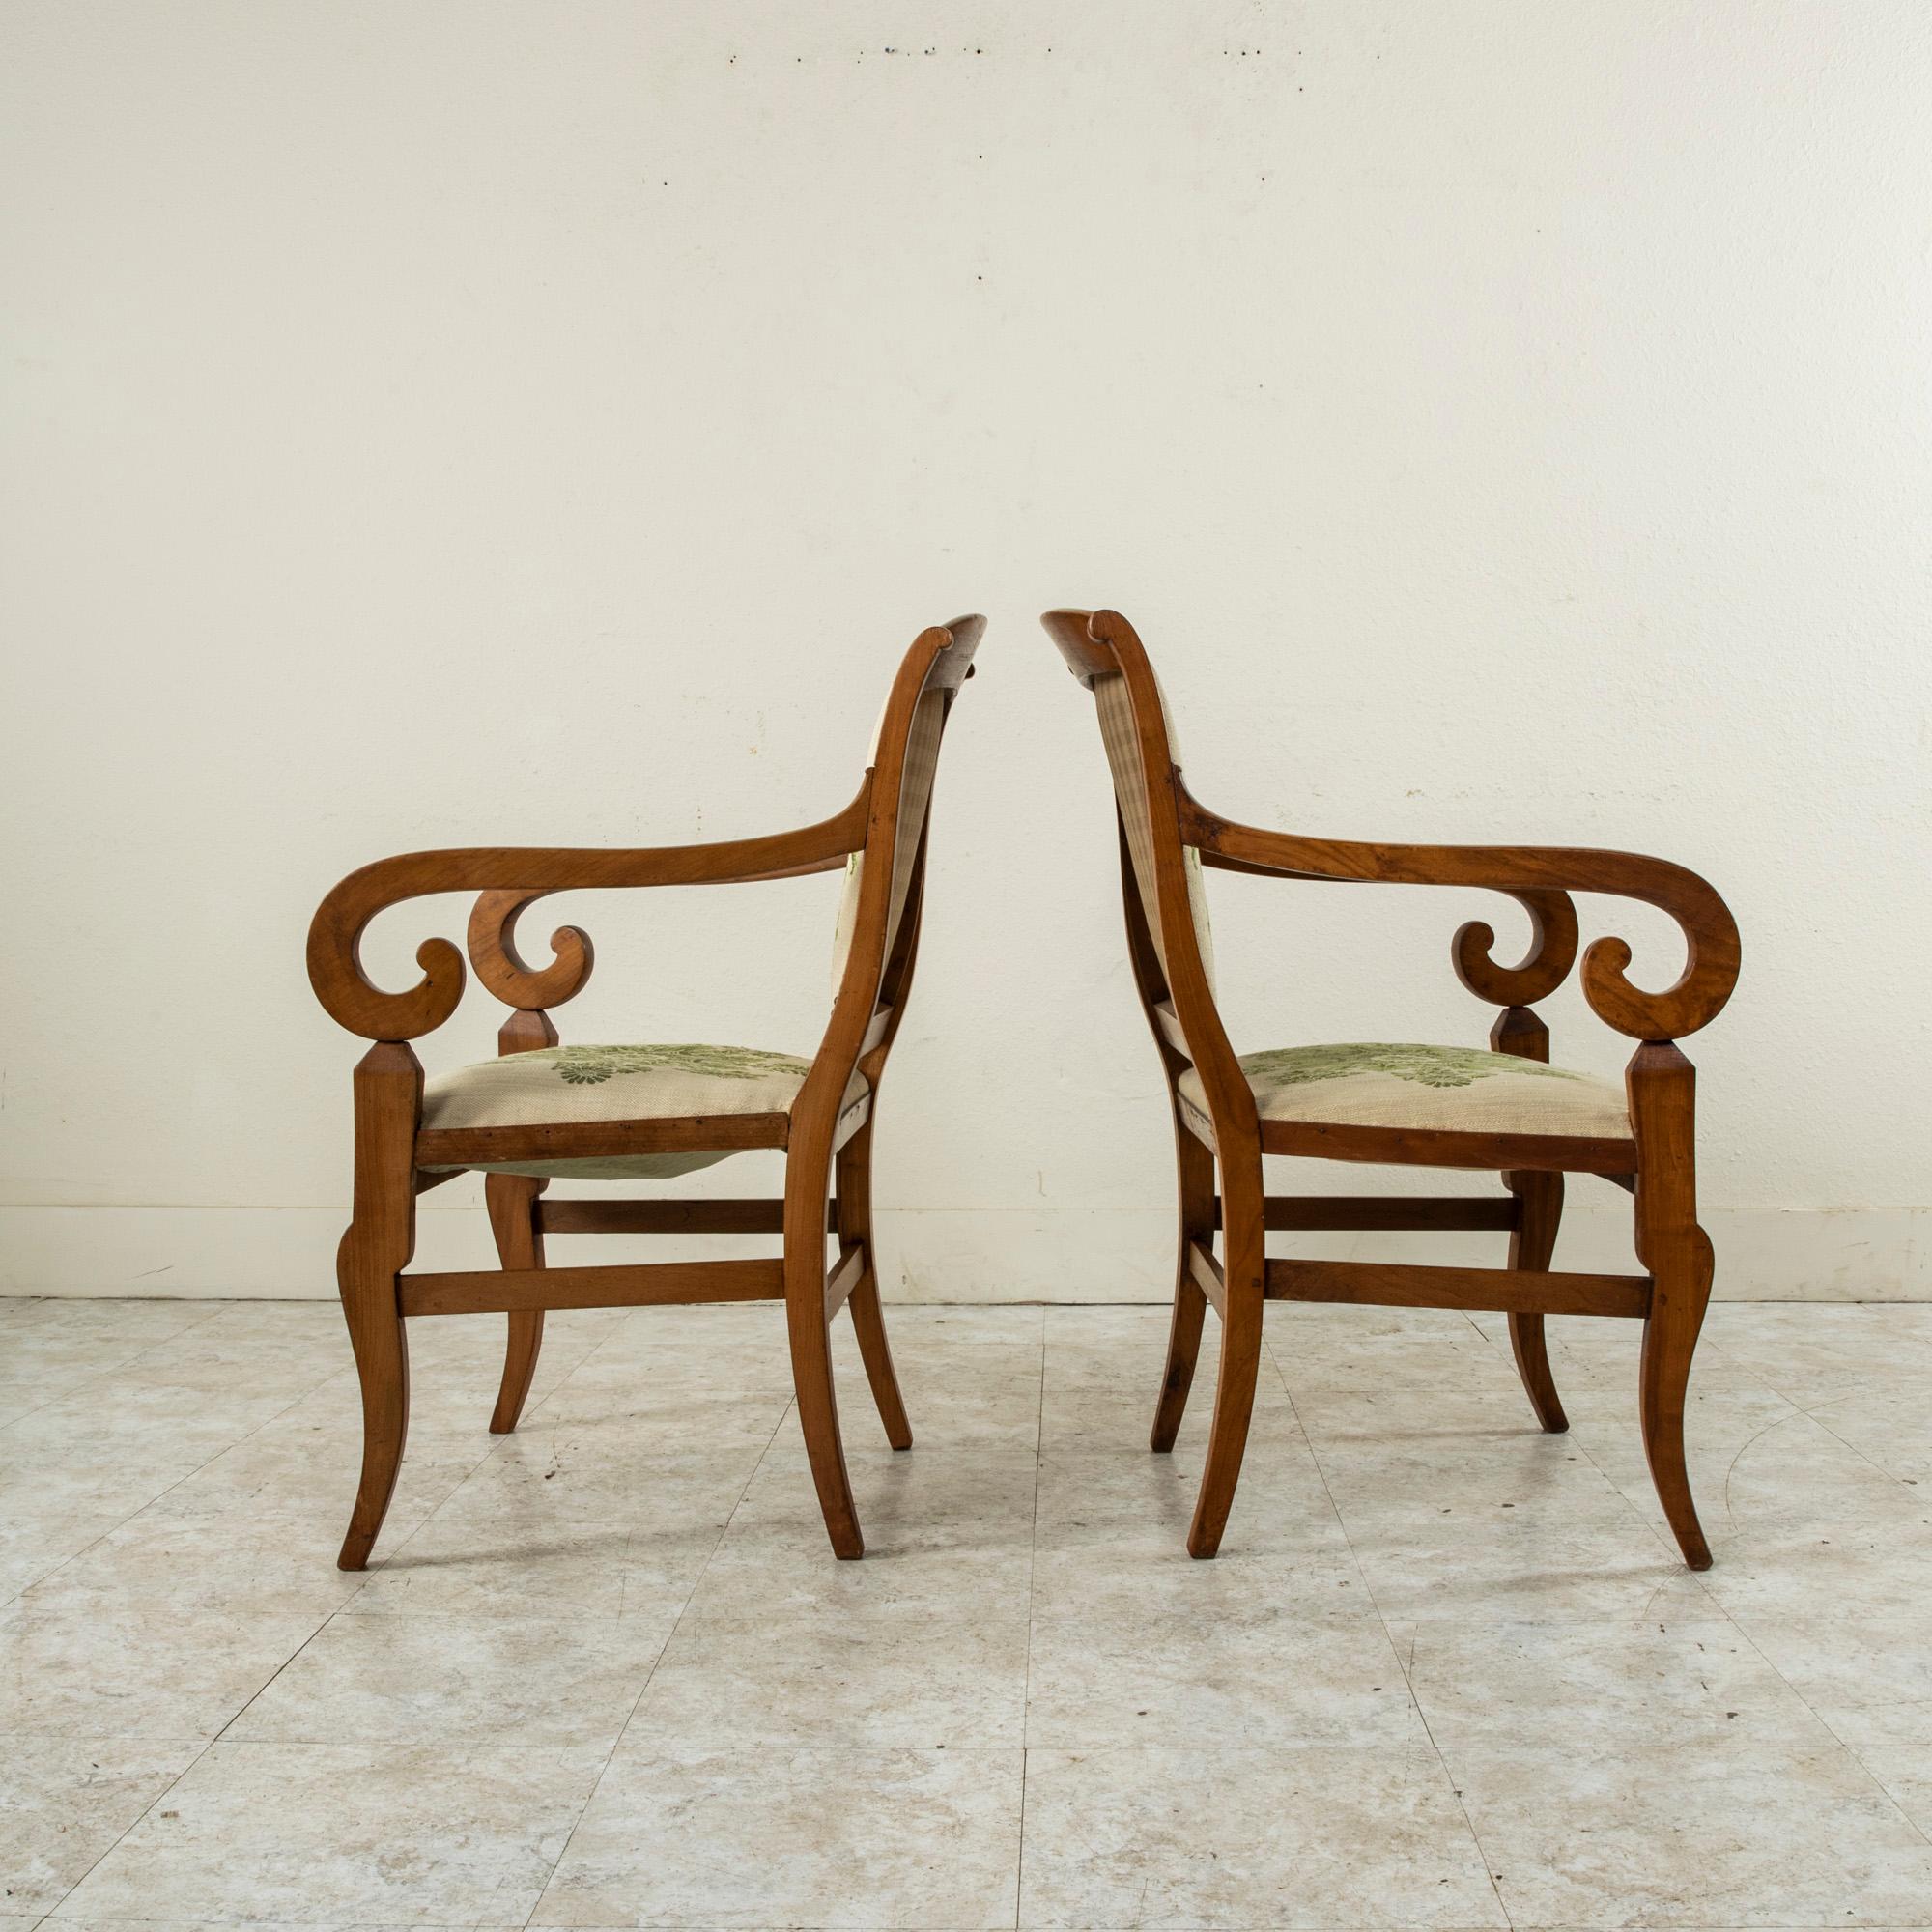 Early 19th Century French Restauration Period Elm Armchairs with Urn Motif For Sale 1